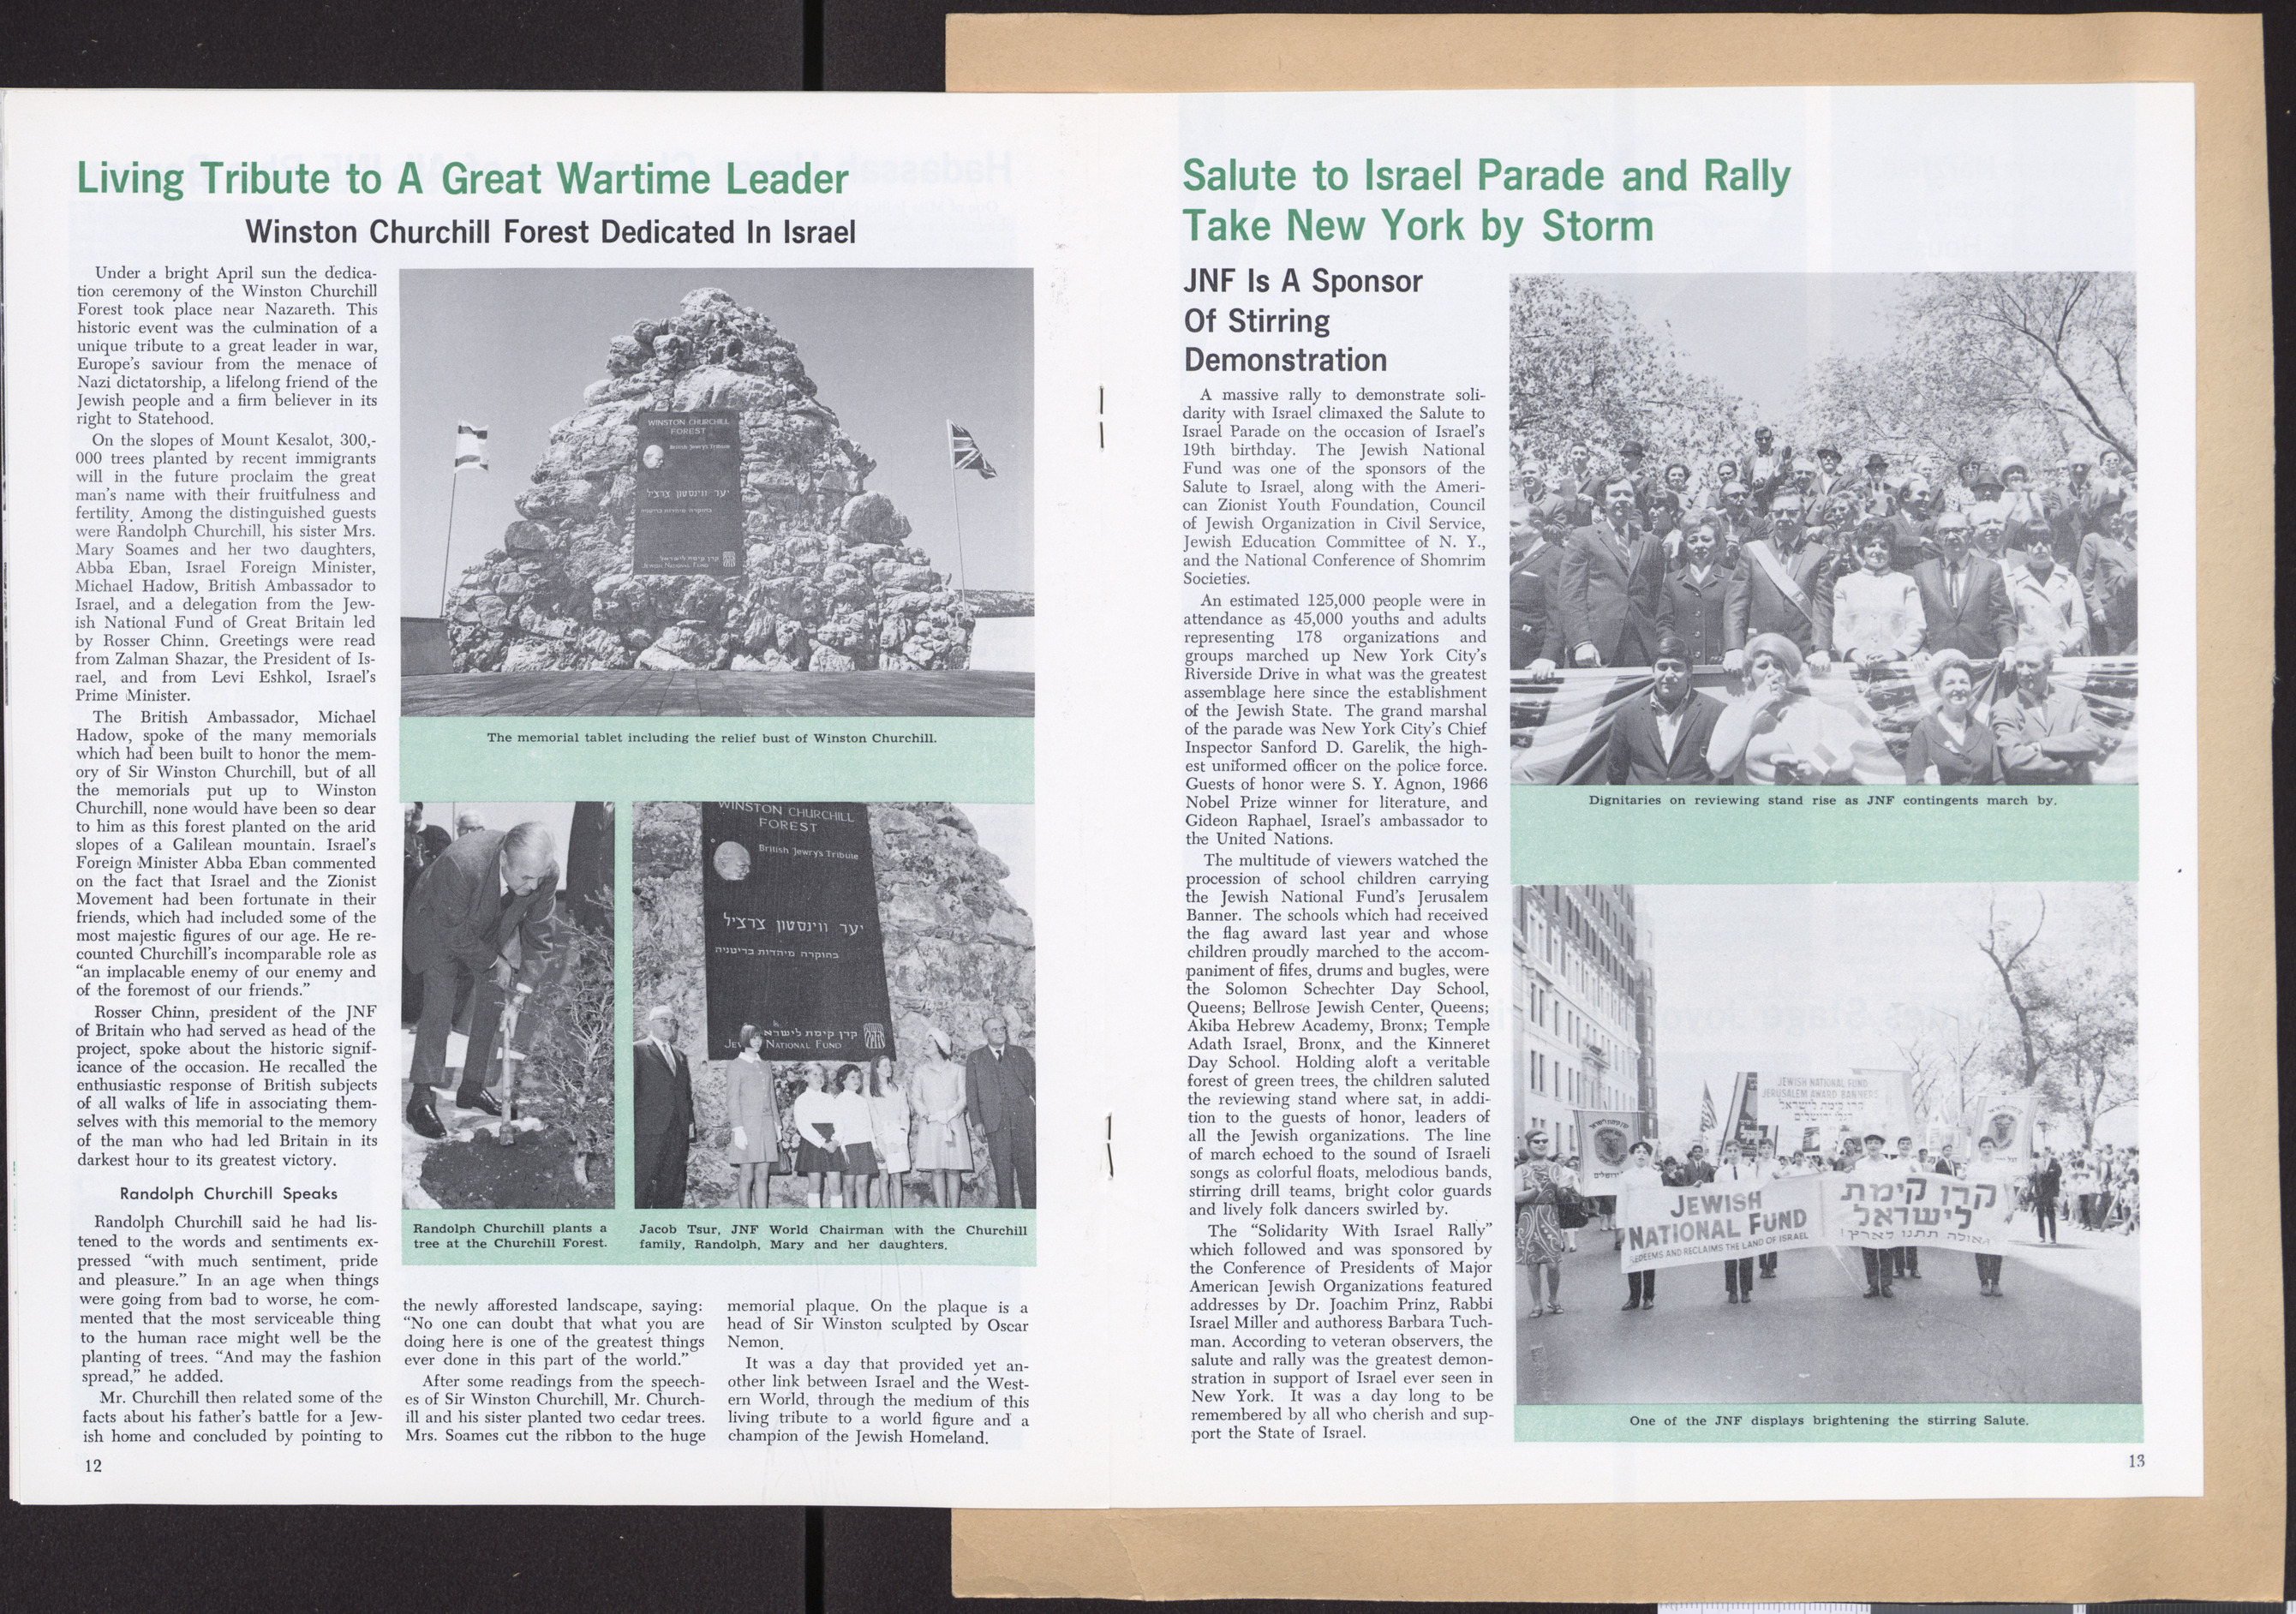 Magazine, Land and Life, Vol. XXII, No. 5, Summer 1967, pages 12-13